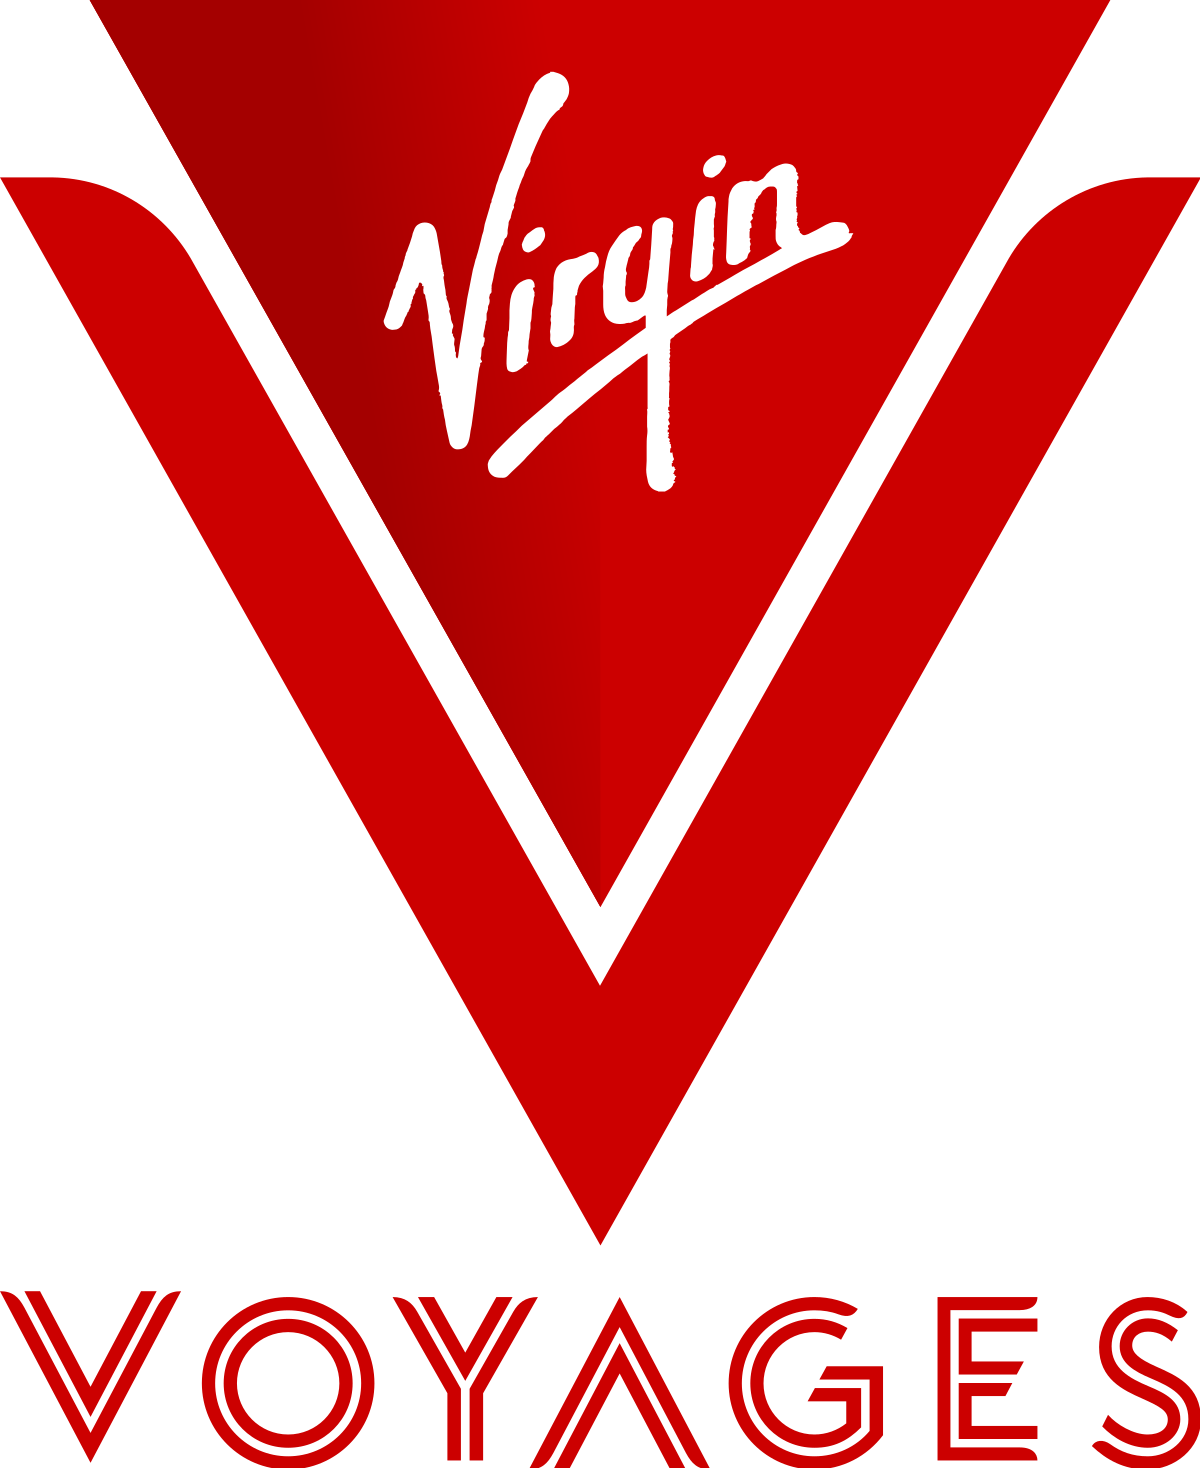 Virgin Voyages Memorial Dal Flash Sale For Barcelona or Athens: 75% Off 2nd Guest, $600 In Free Drinks & Automatic Elite Status - Book by May 31, 2023